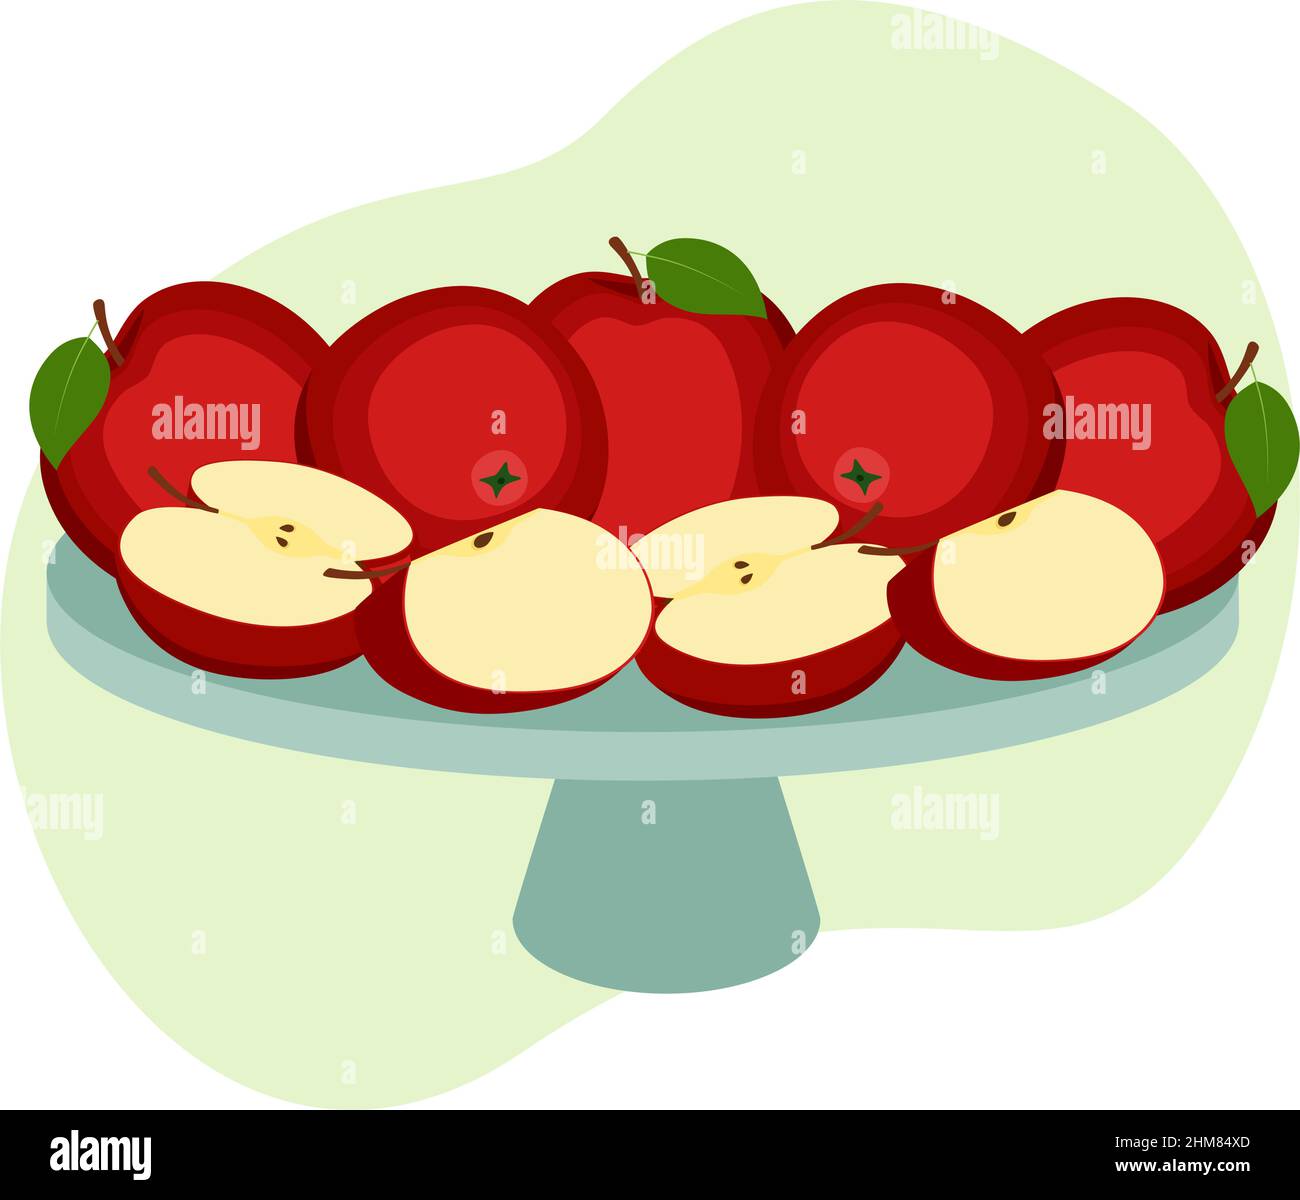 Ripe apples on tray, whole fruit and halves, vector illustration Stock Vector